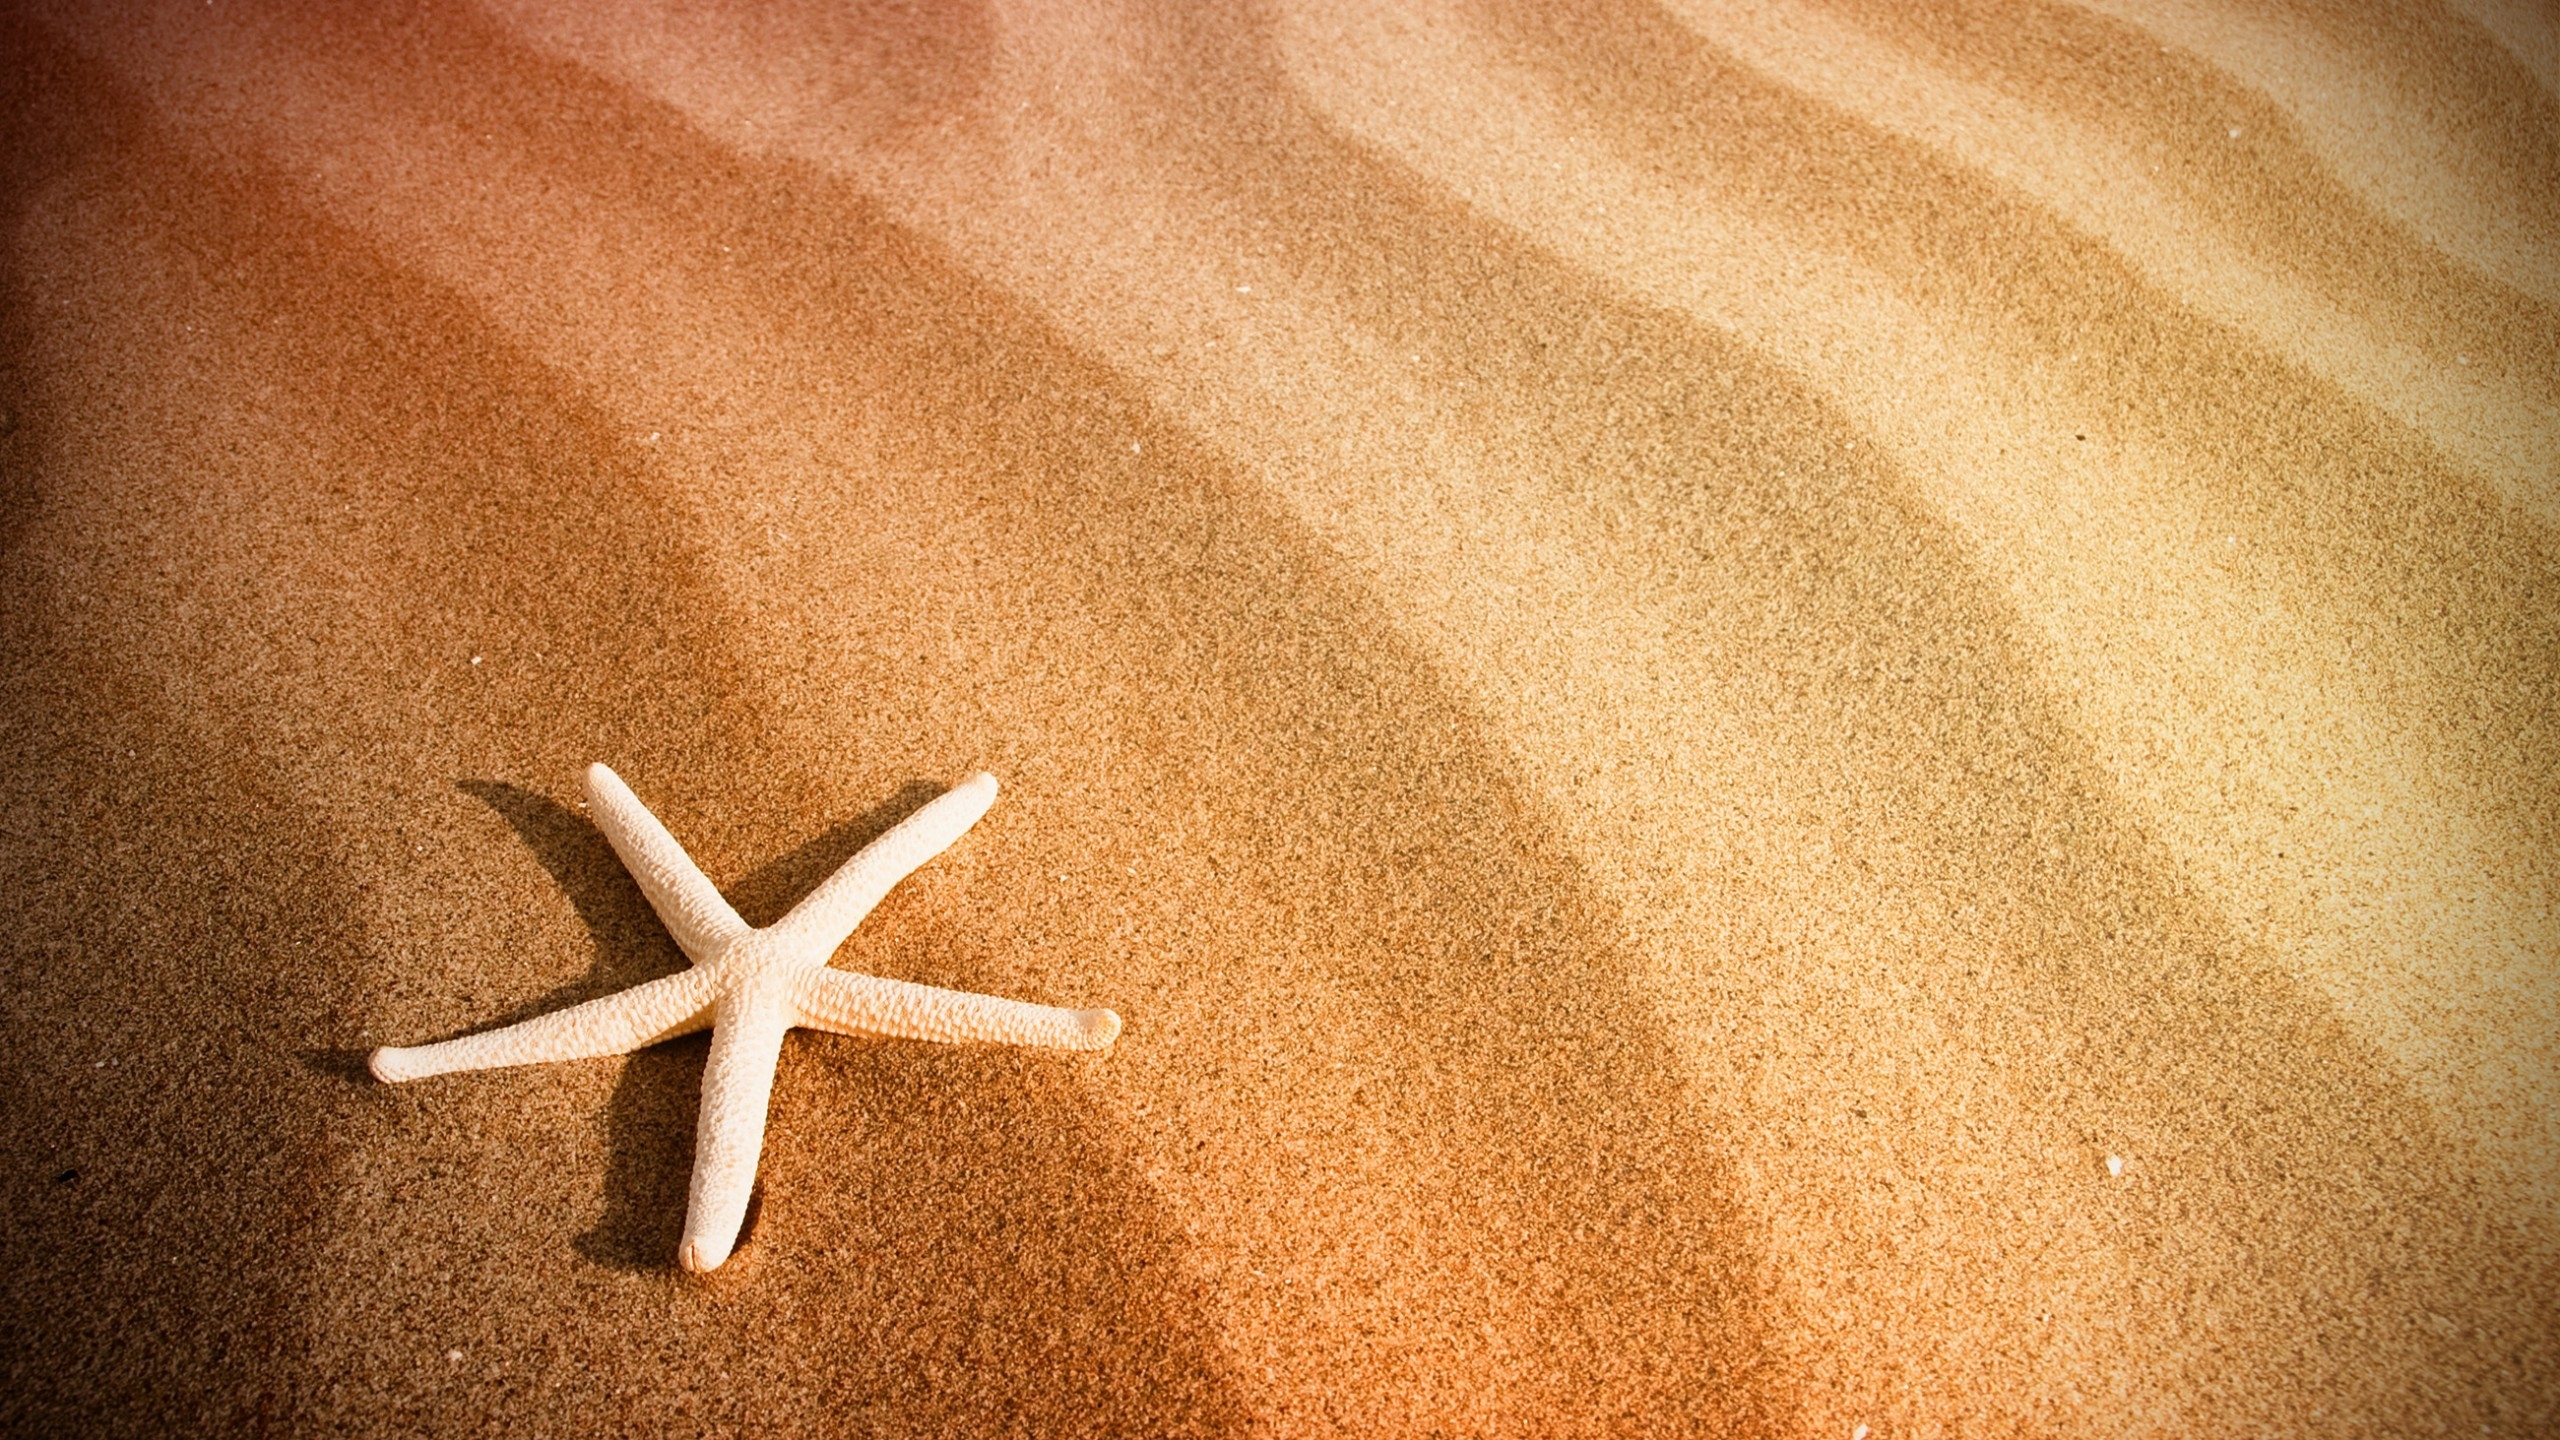 Starfish and Sand for 2560x1440 HDTV resolution